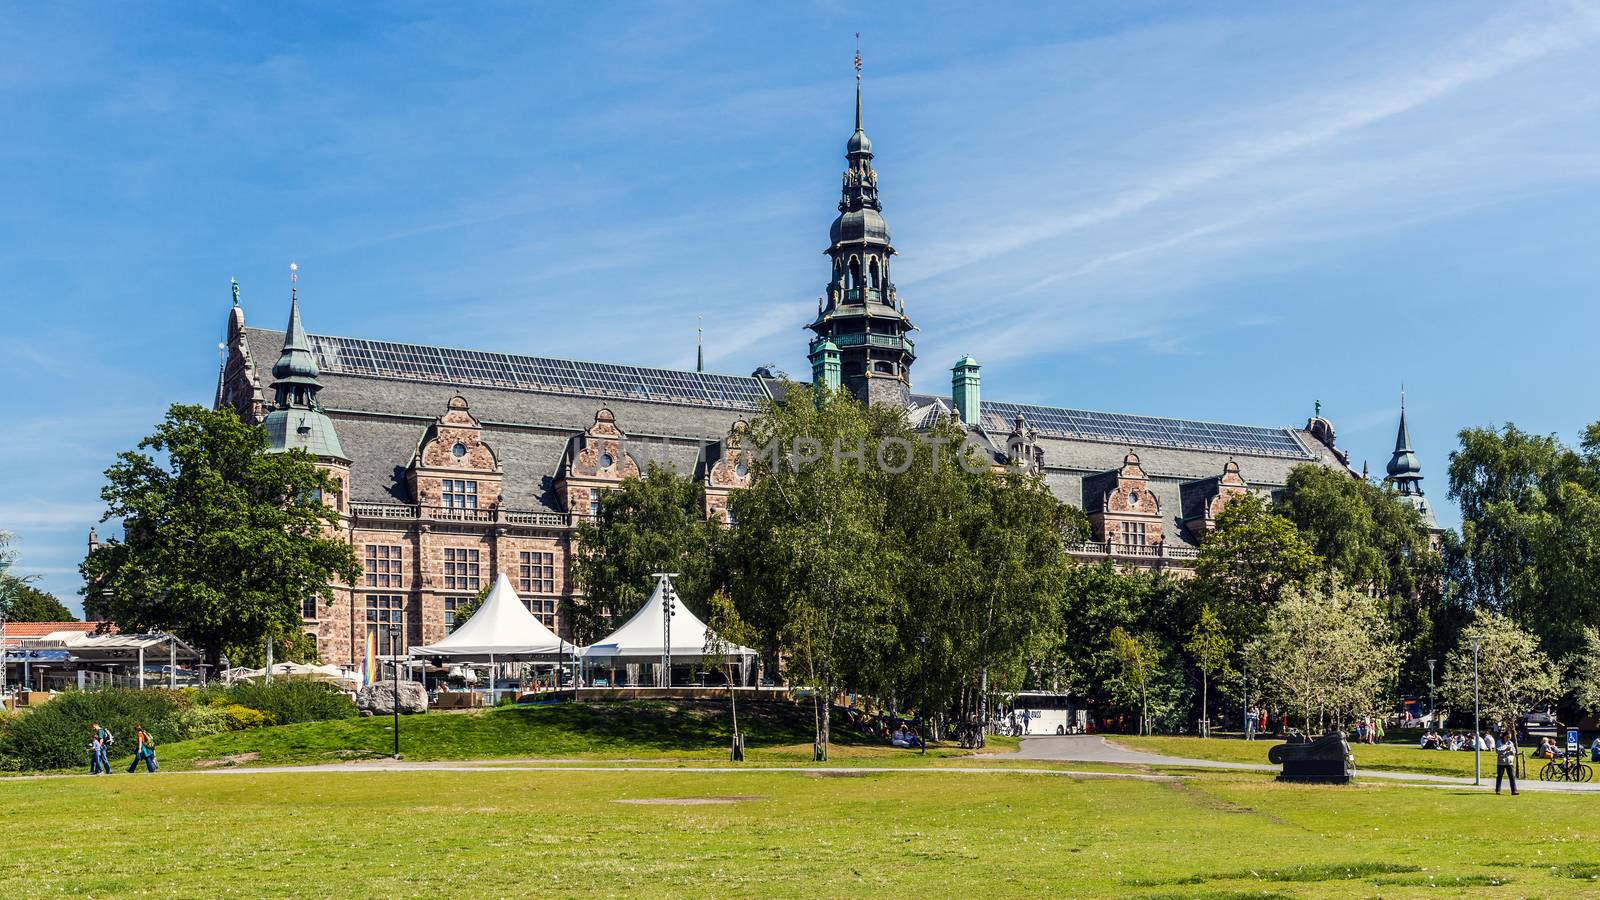 The Nordic Museum on Djurgarden Island in Stockholm dedicated for the cultural history and ethnography of Sweden. The museum was founded in the late 19th century by Artur Hazelius.